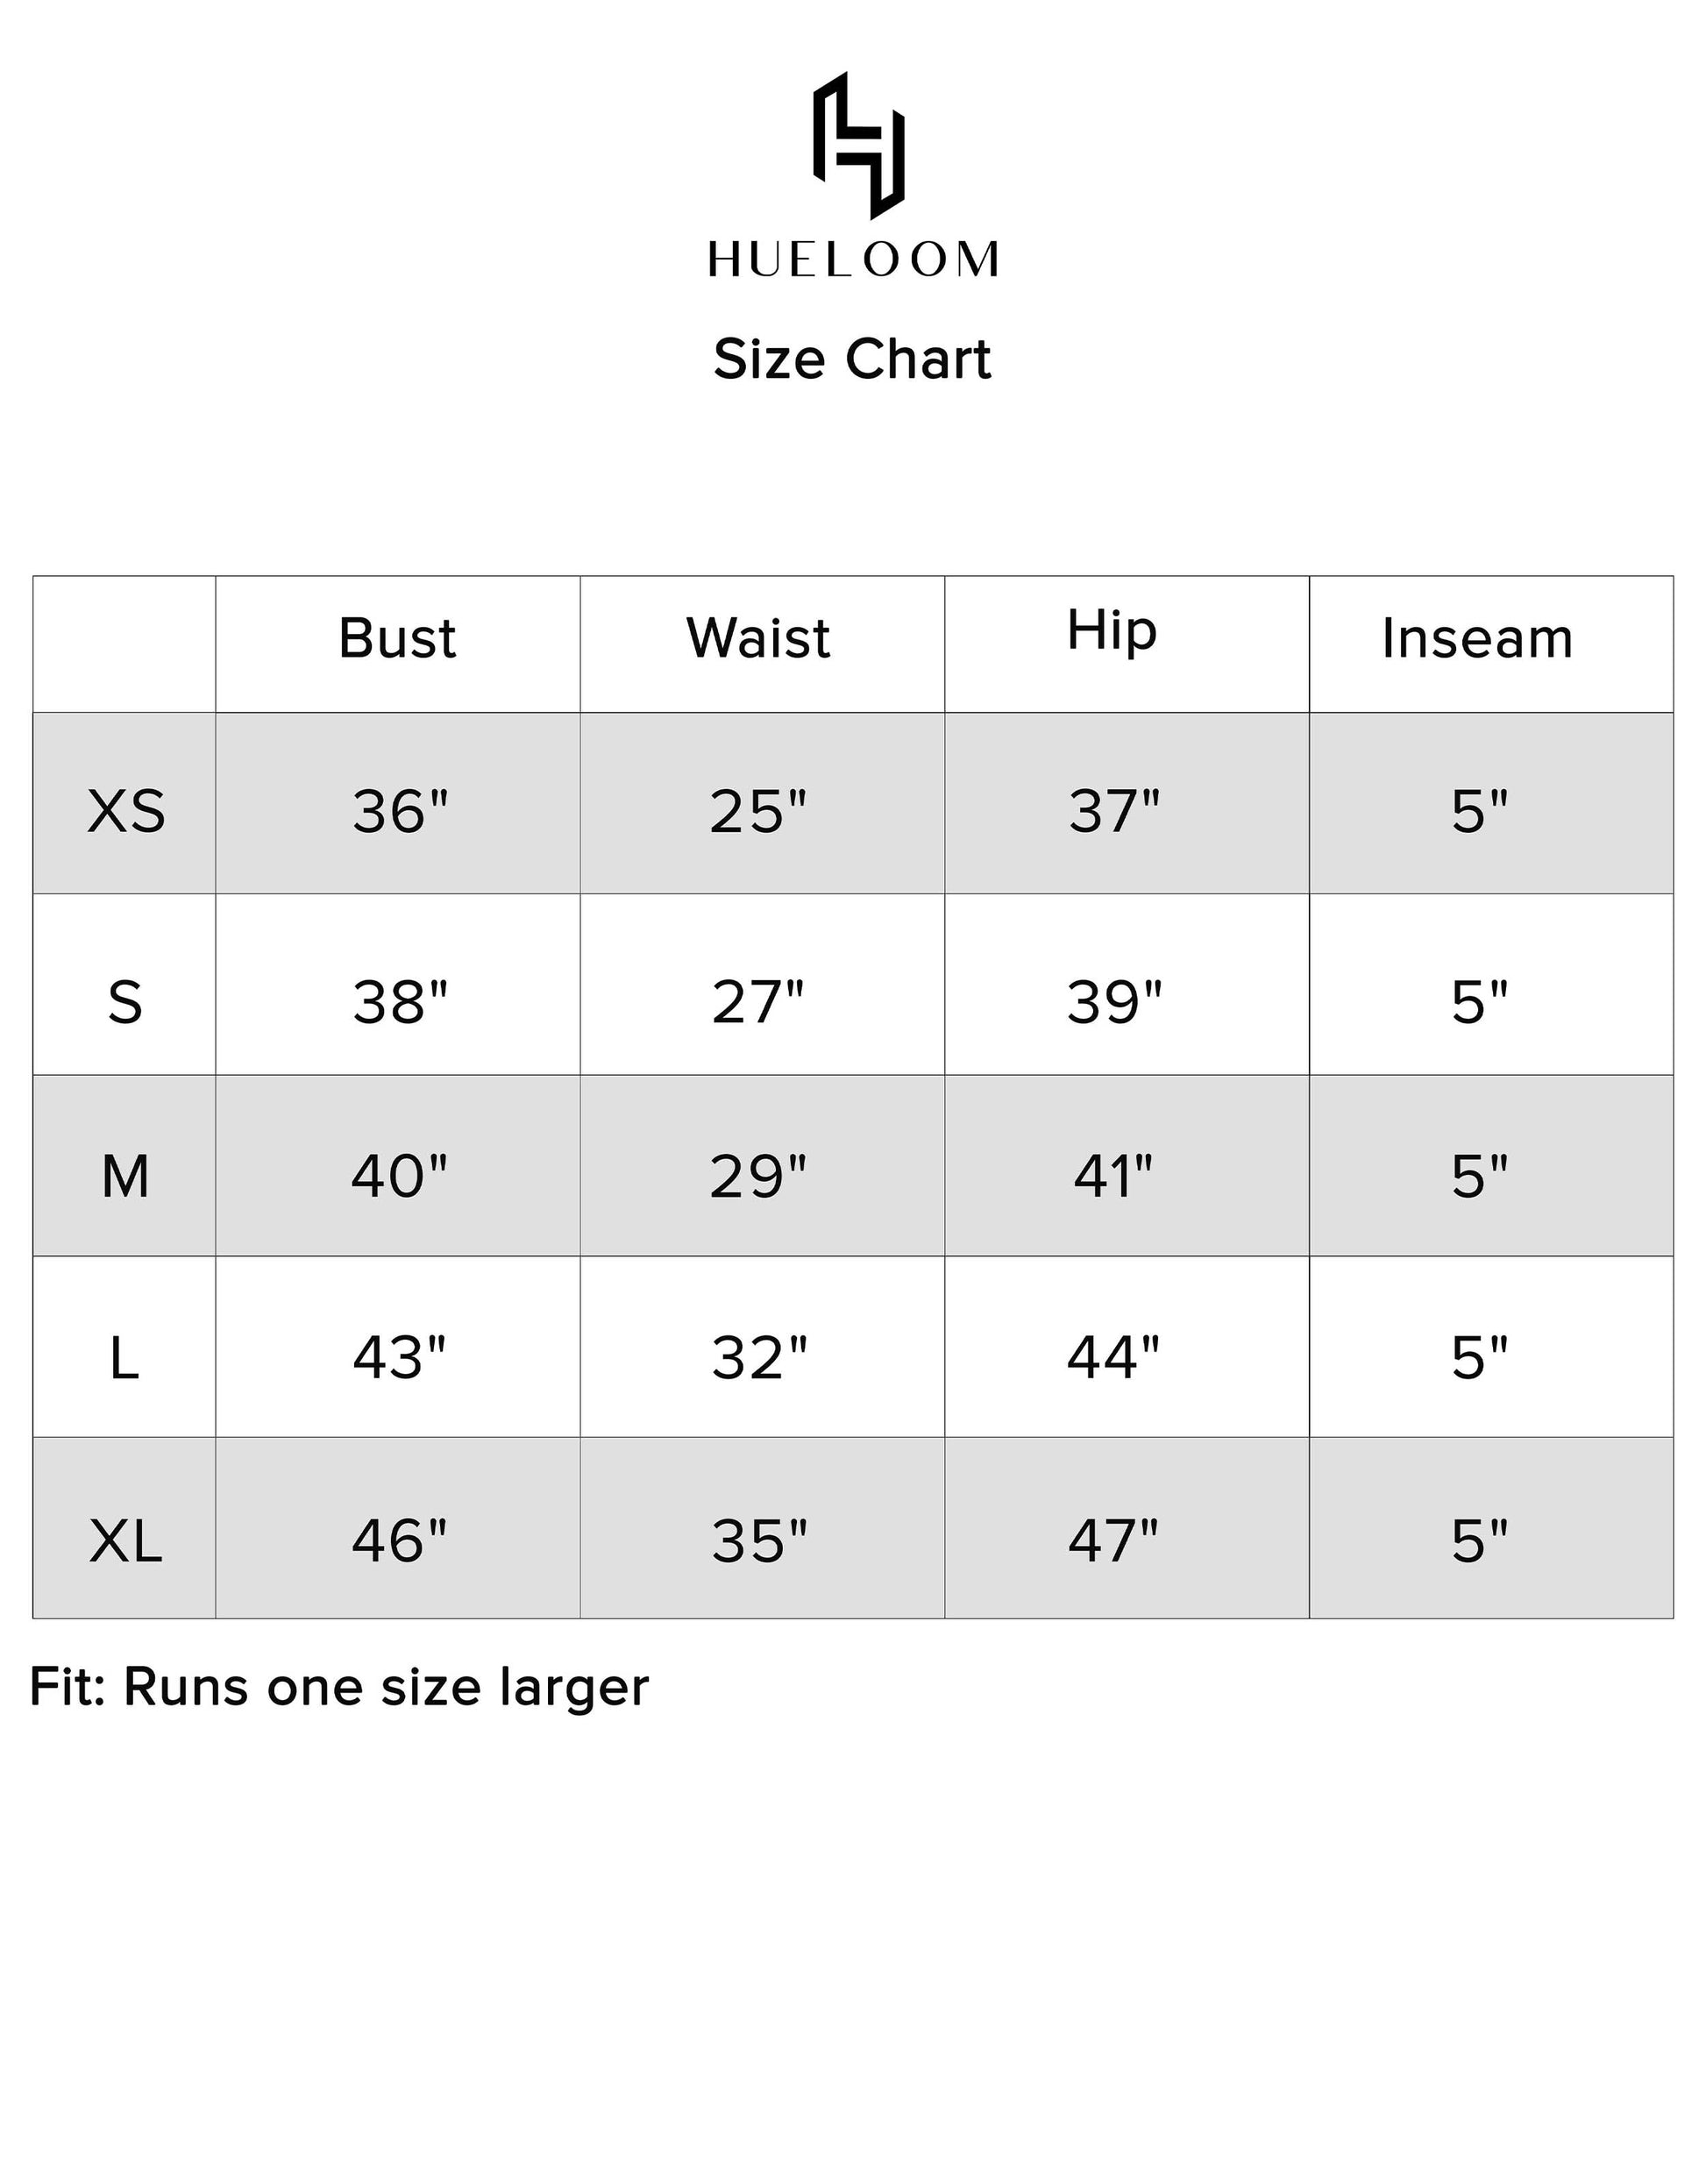 Hueloom navy detachable romper size chart display for accurate sizing.